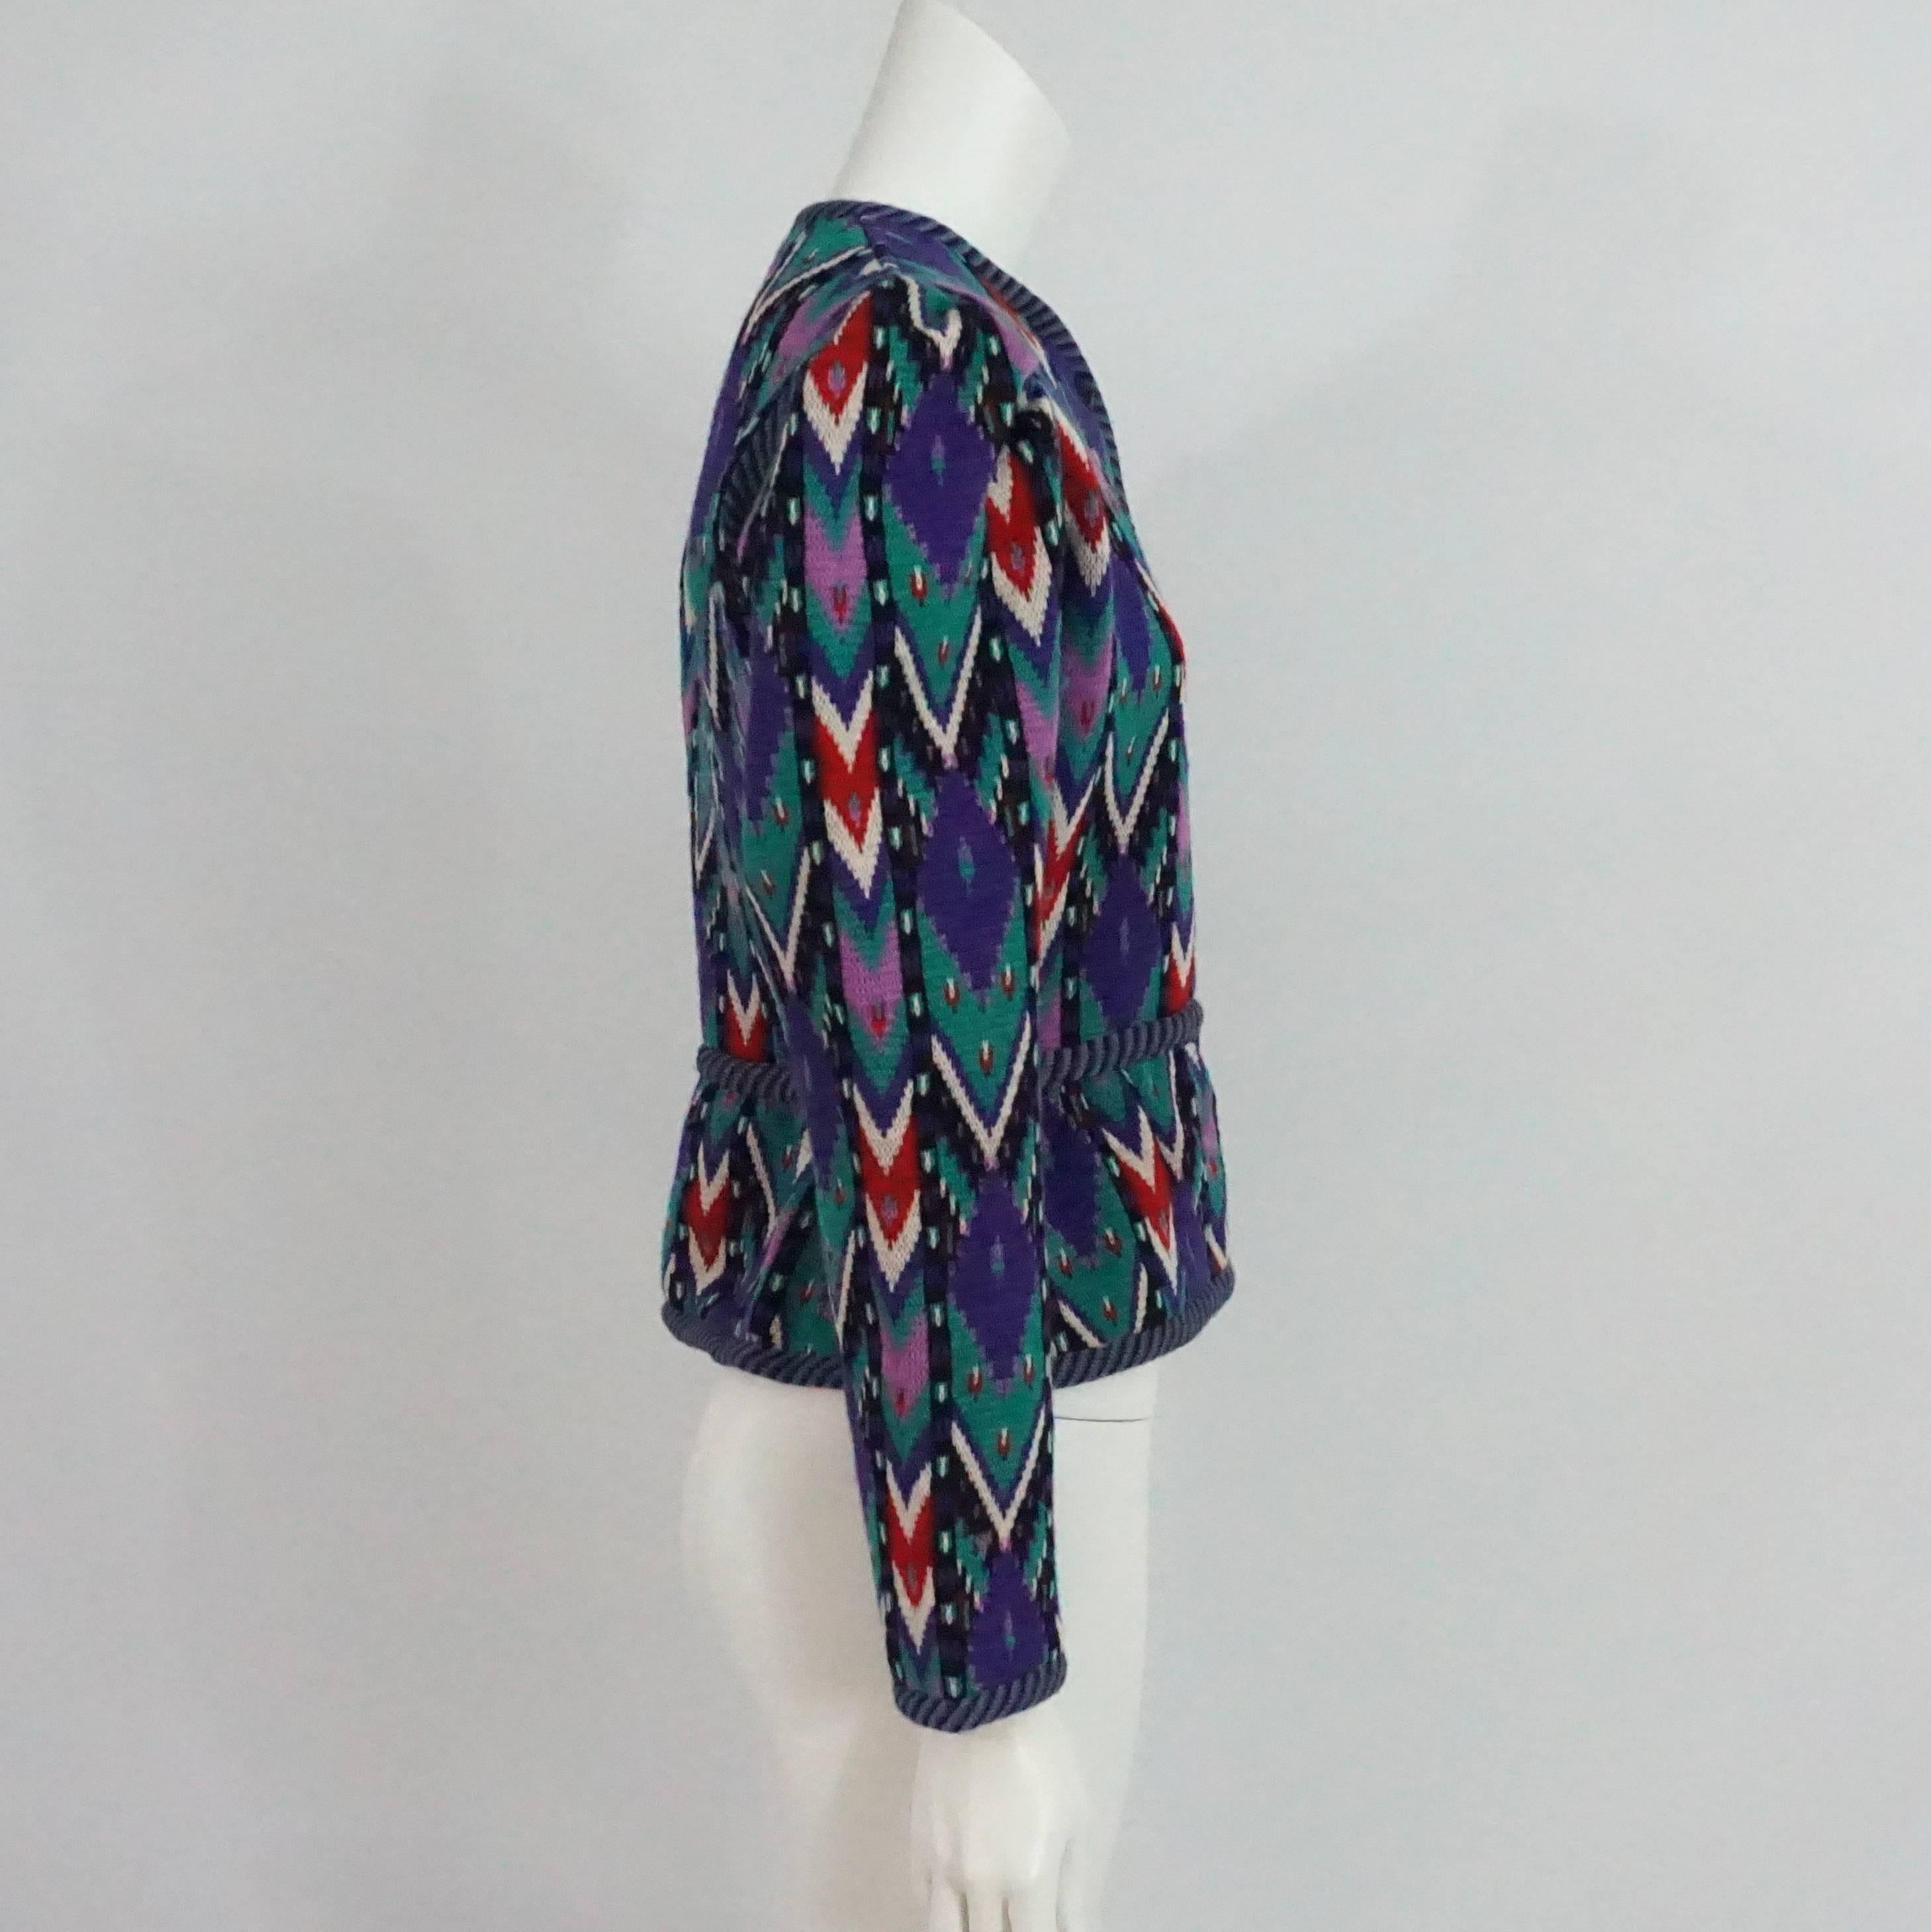 This fun and unique vintage Yves Saint Laurent sweater jacket is made of wool. It features a multi-colored chevron-like print. There is a mixture of red, black, white, green, purple, and blue. There is a slight collar, black buttons, a slight peplum